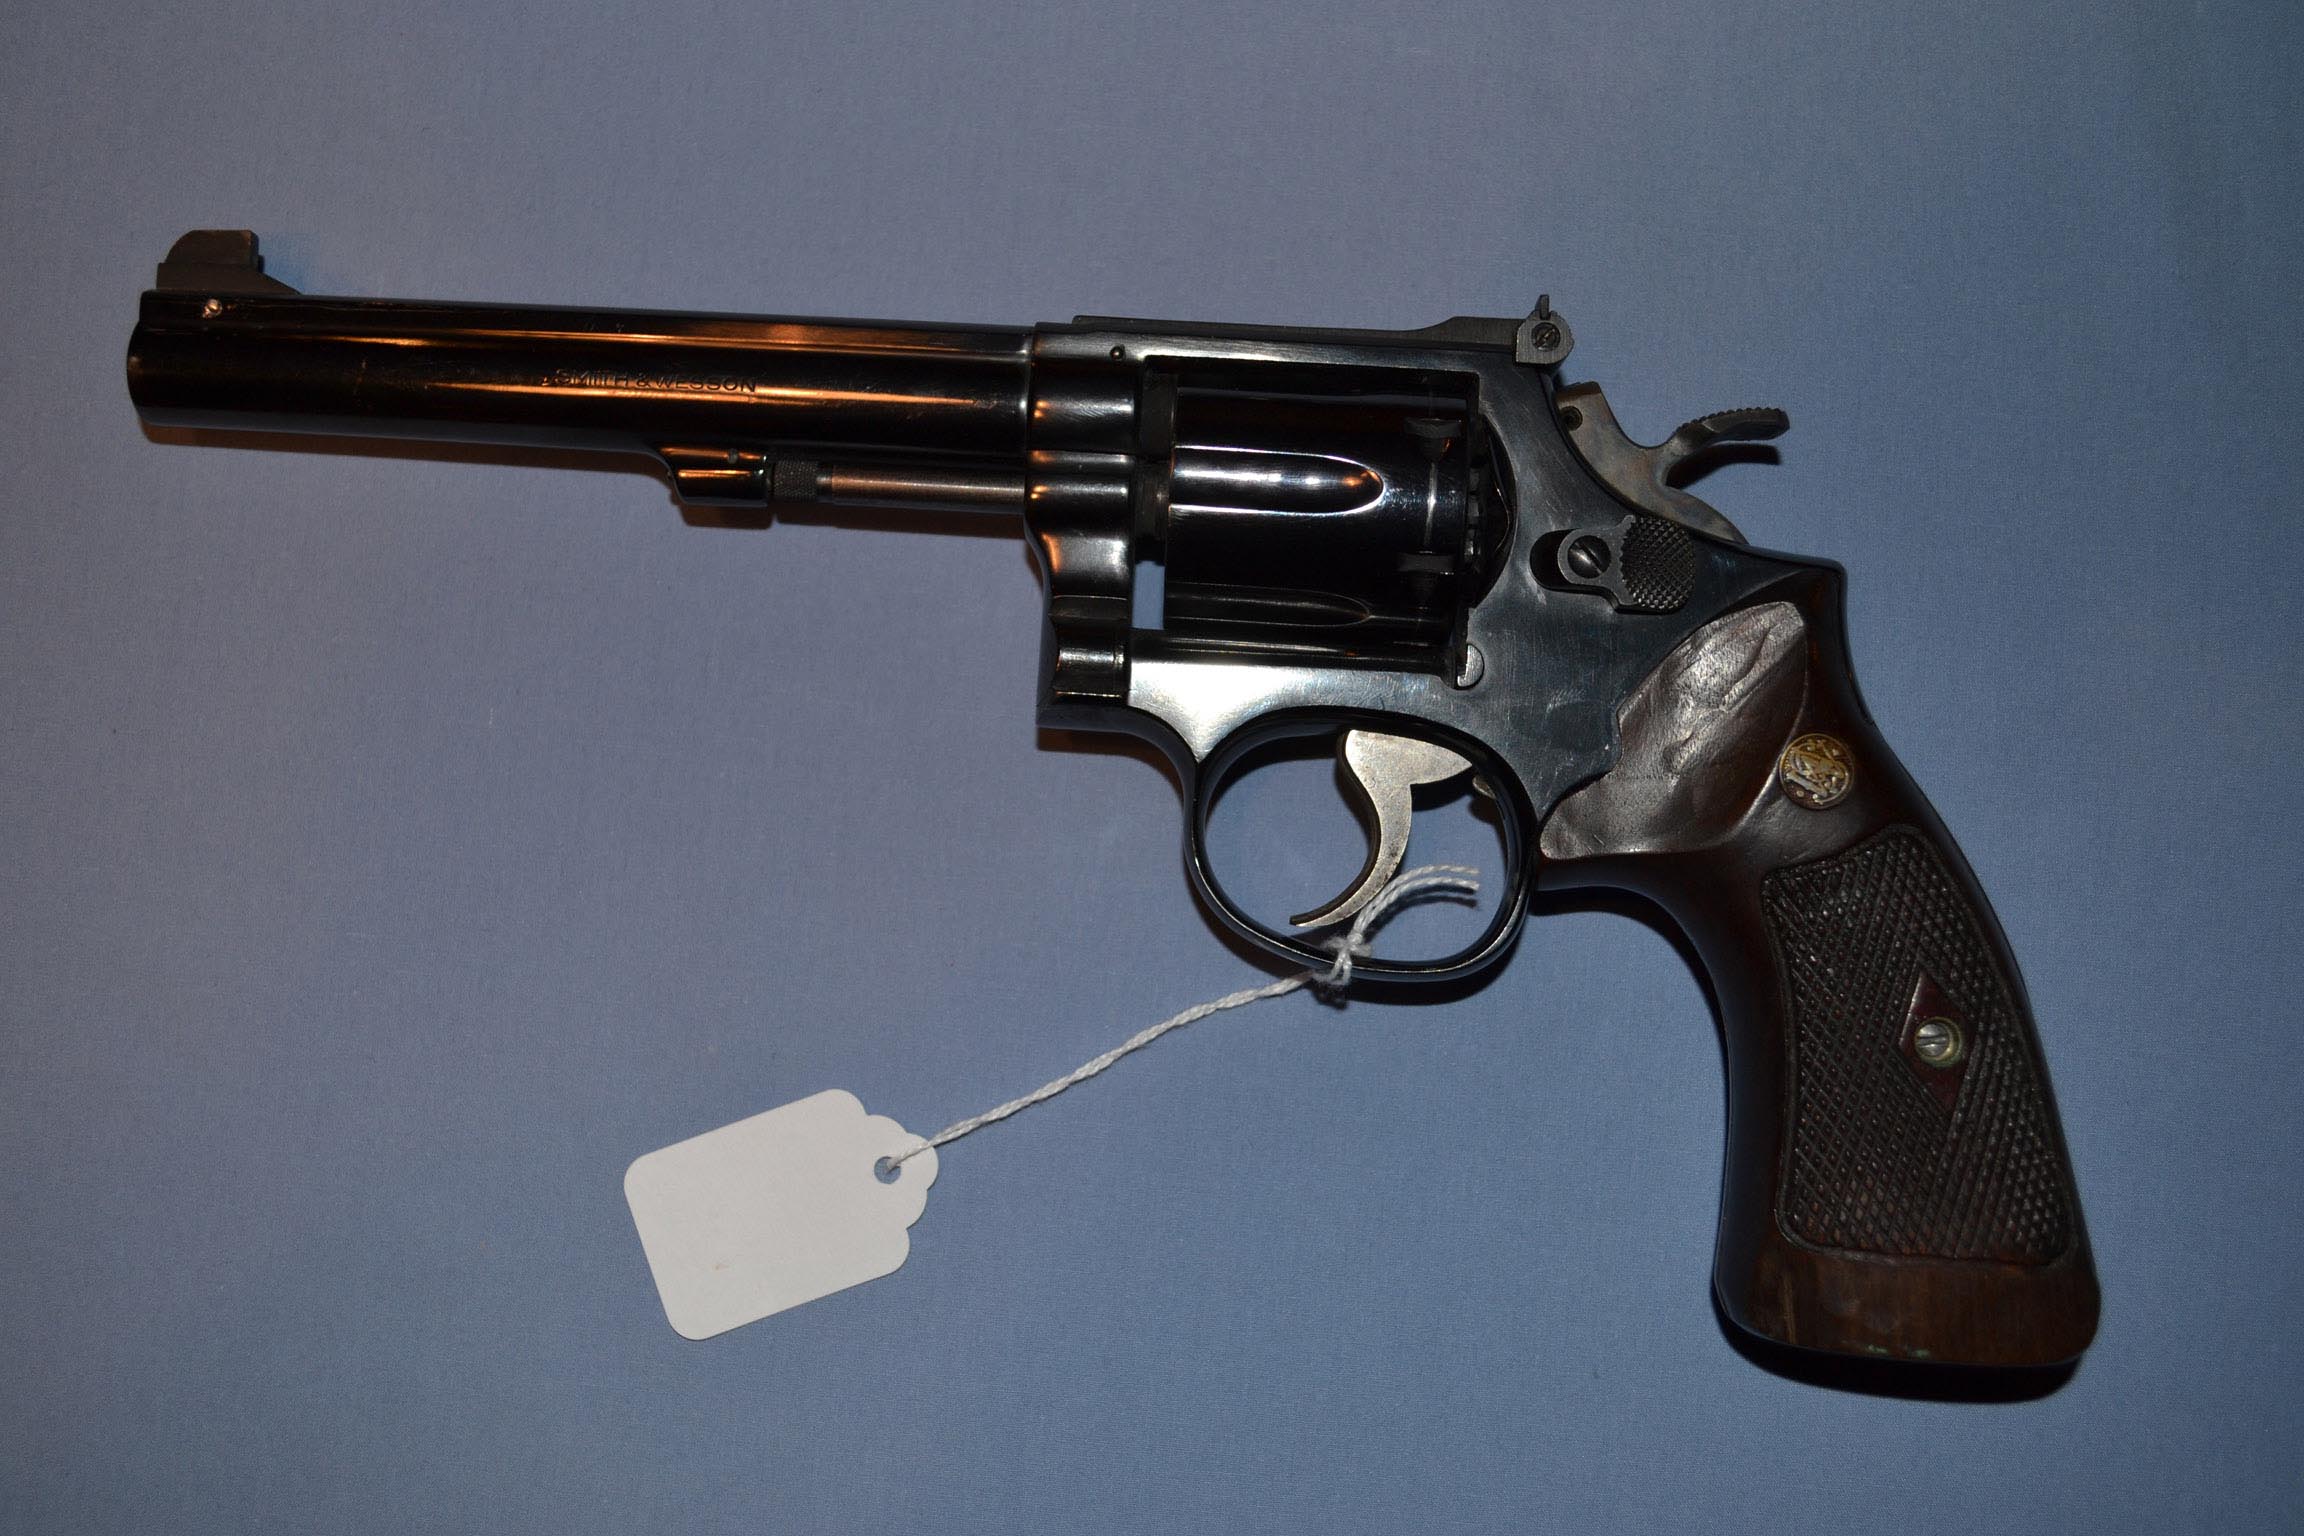 Smith & Wesson model 14-4, 38 special